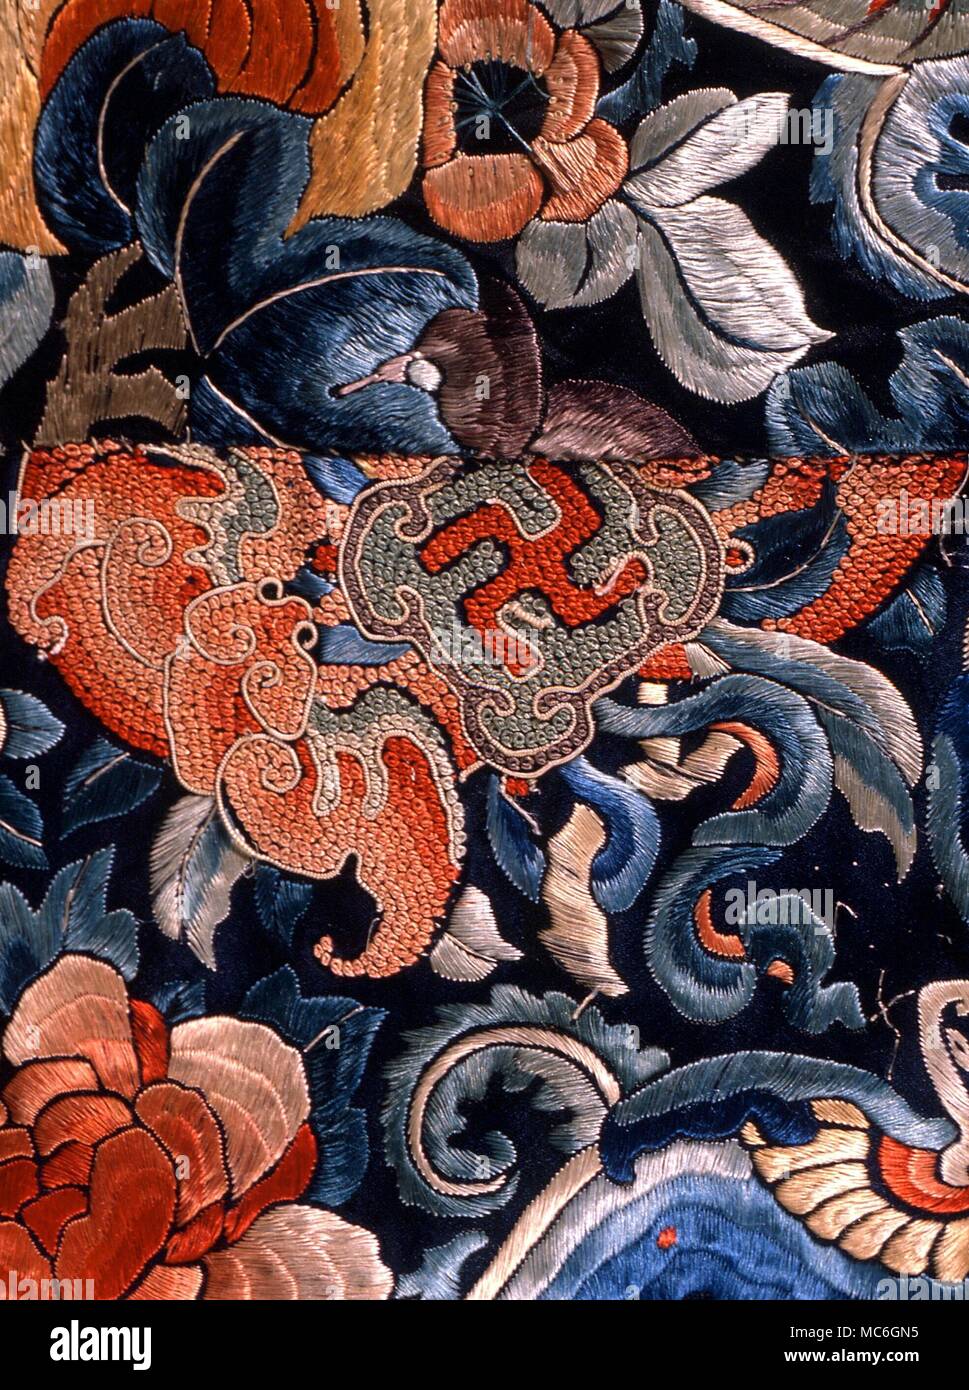 SWASTIKA Sauwastika as a Buddhist symbol, on a silken robe embroidery (19th century) formerly used in the Chinese court. Private collection, Hong Kong Stock Photo